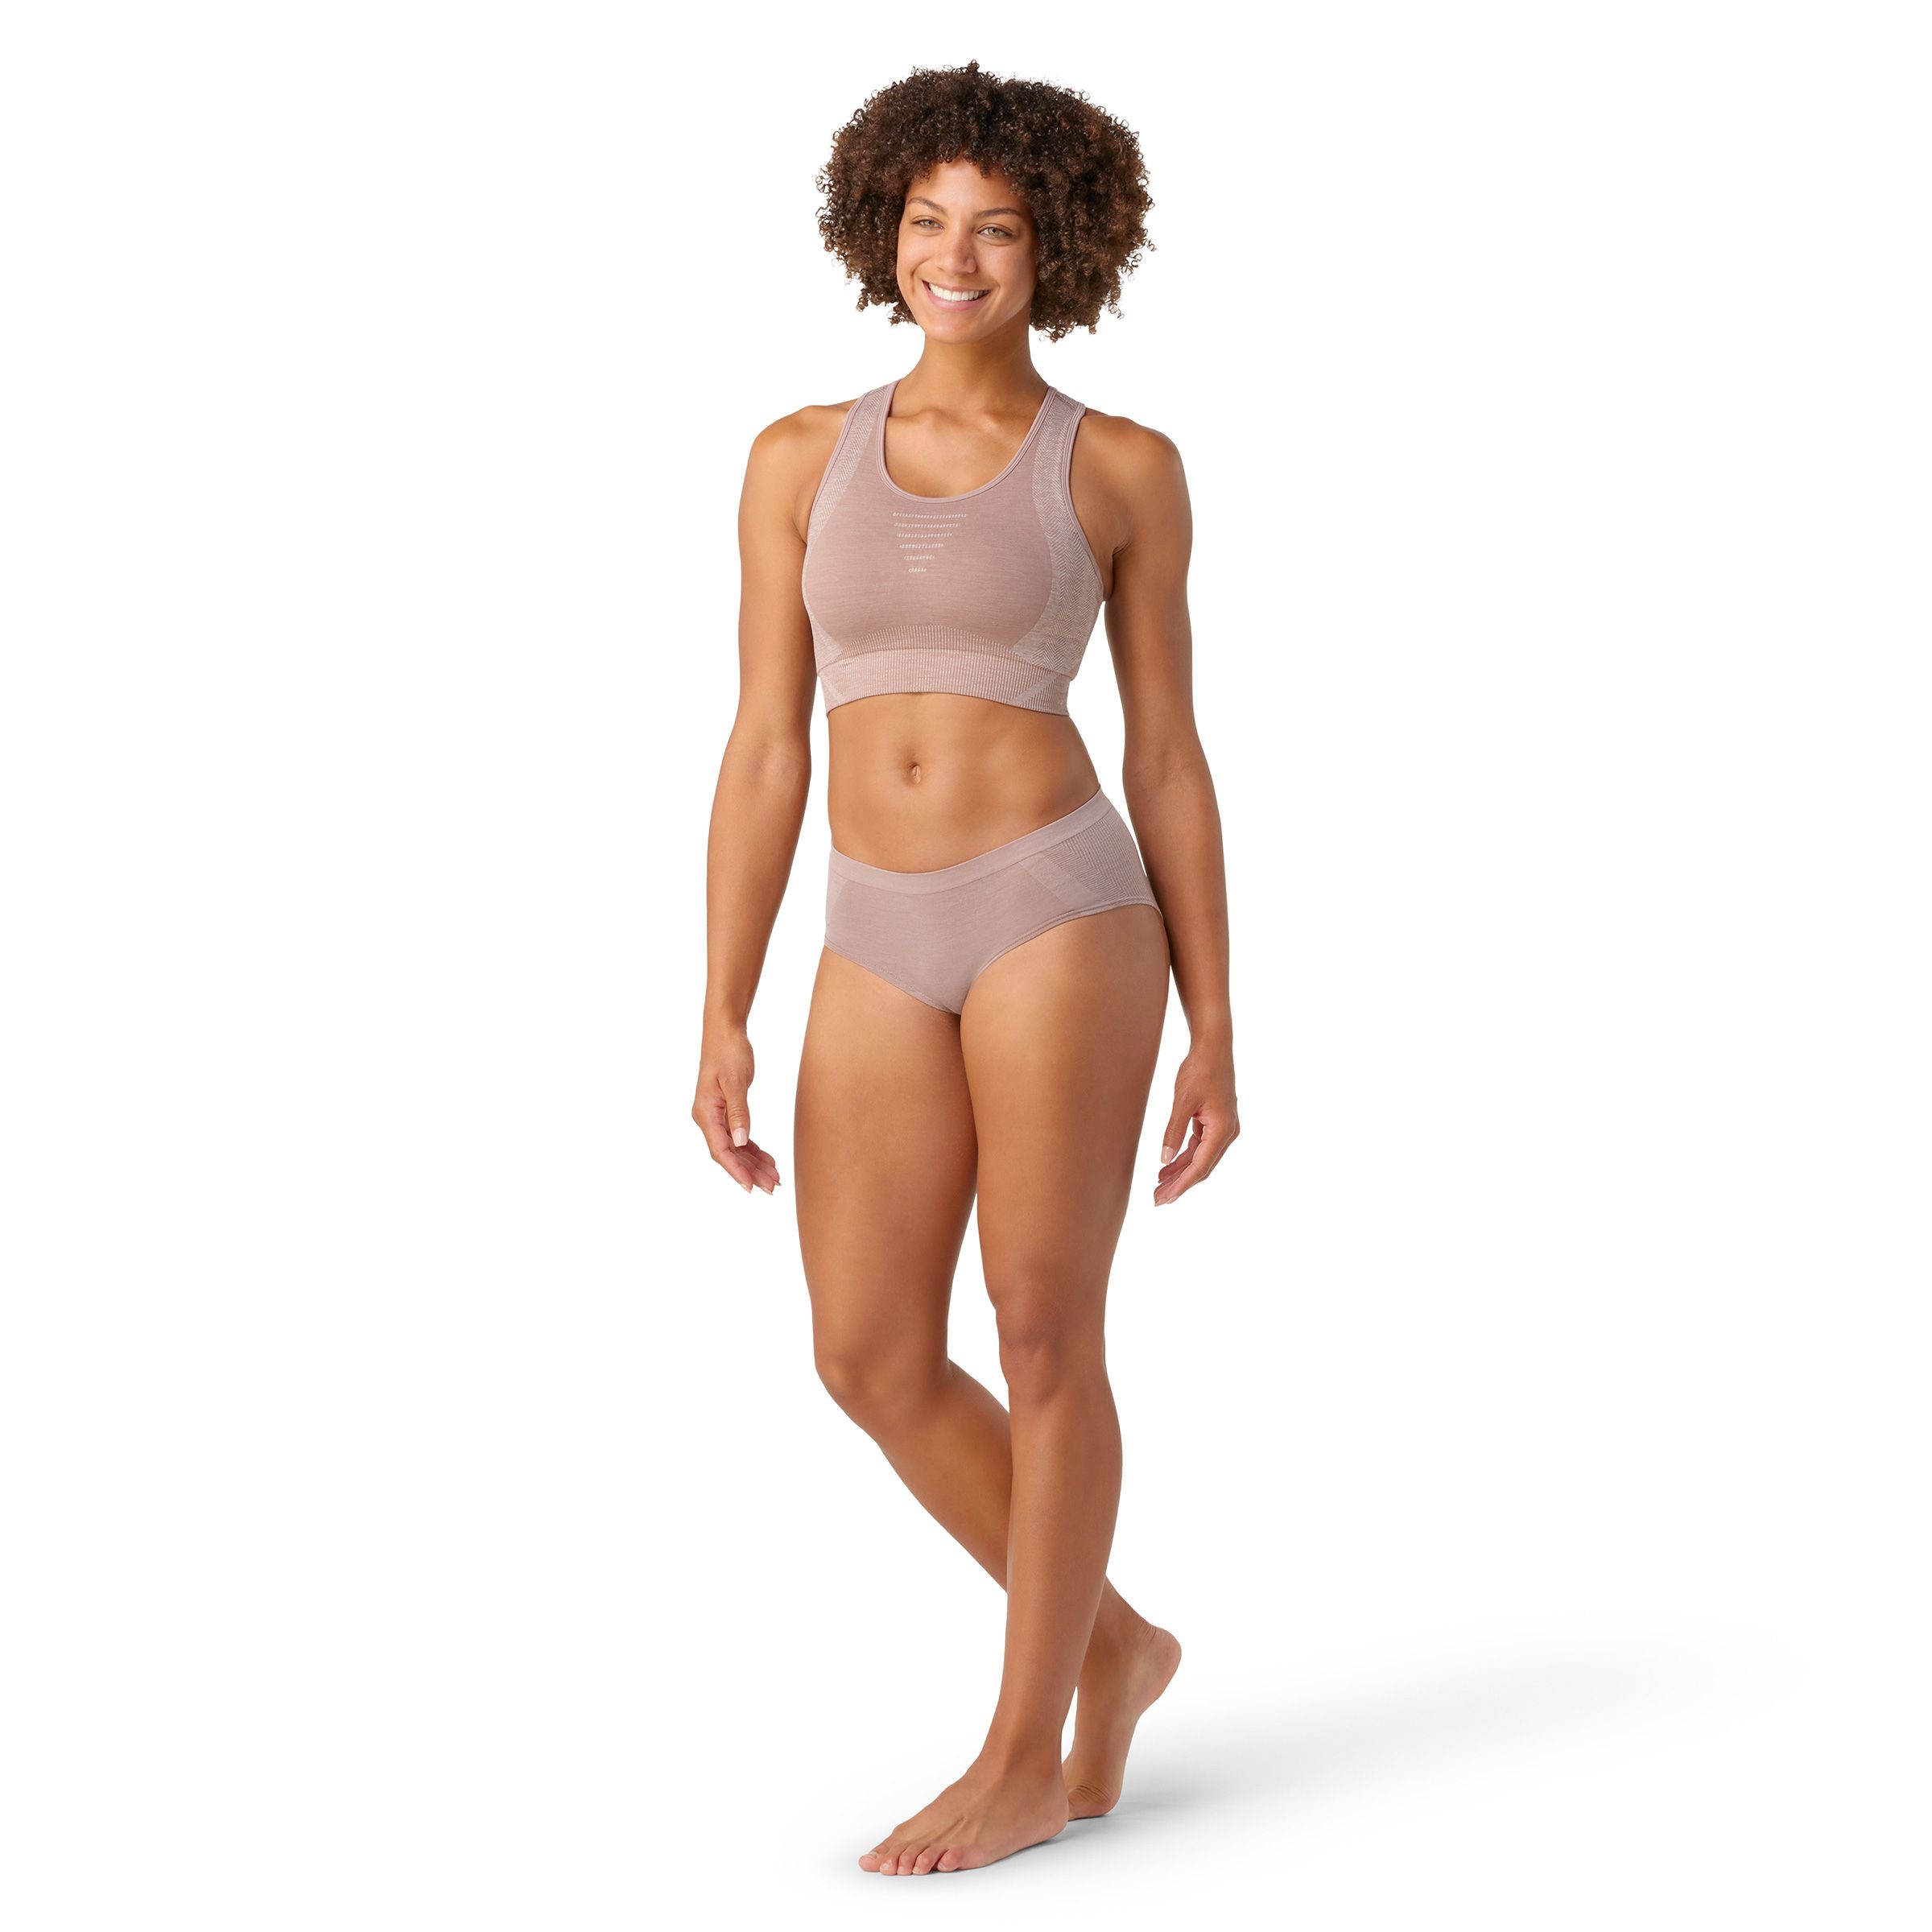 GRAVOII Underwear Women, Seamless middle-Waisted Breathable Soft